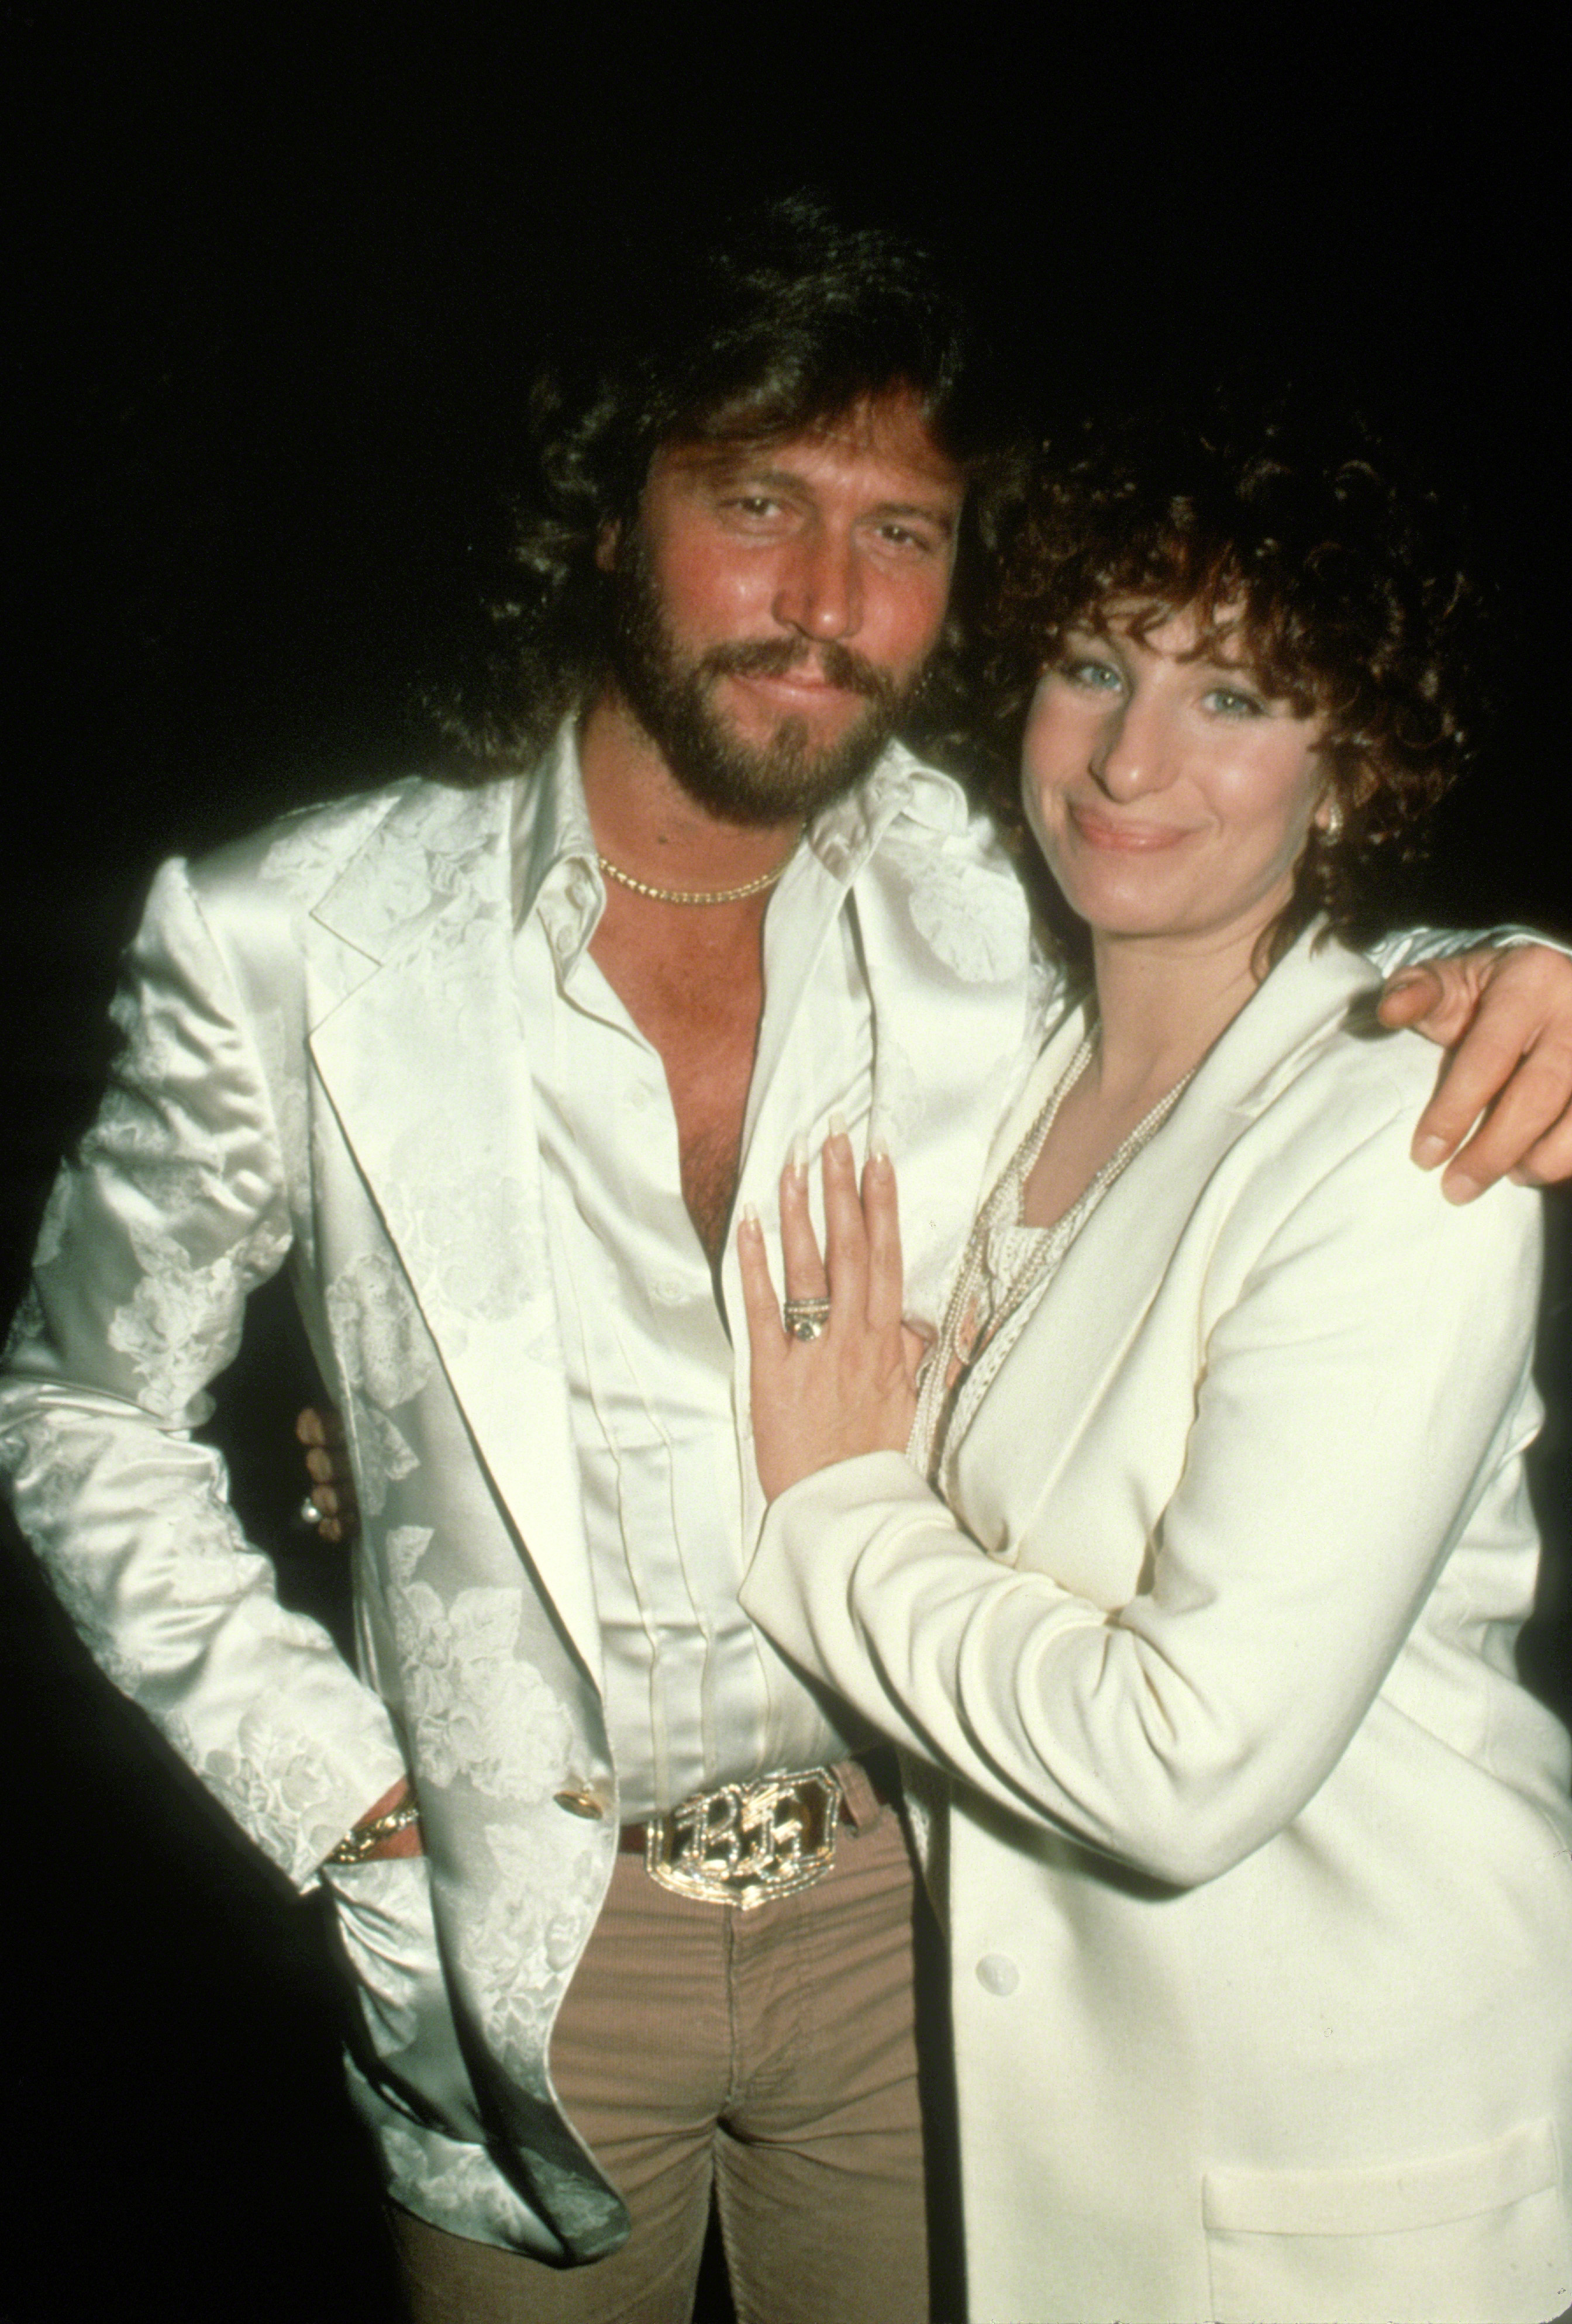 Barry Gibb of the Bee Gees and Barbra Streisand circa 1981 in New York City | Source: Getty Images